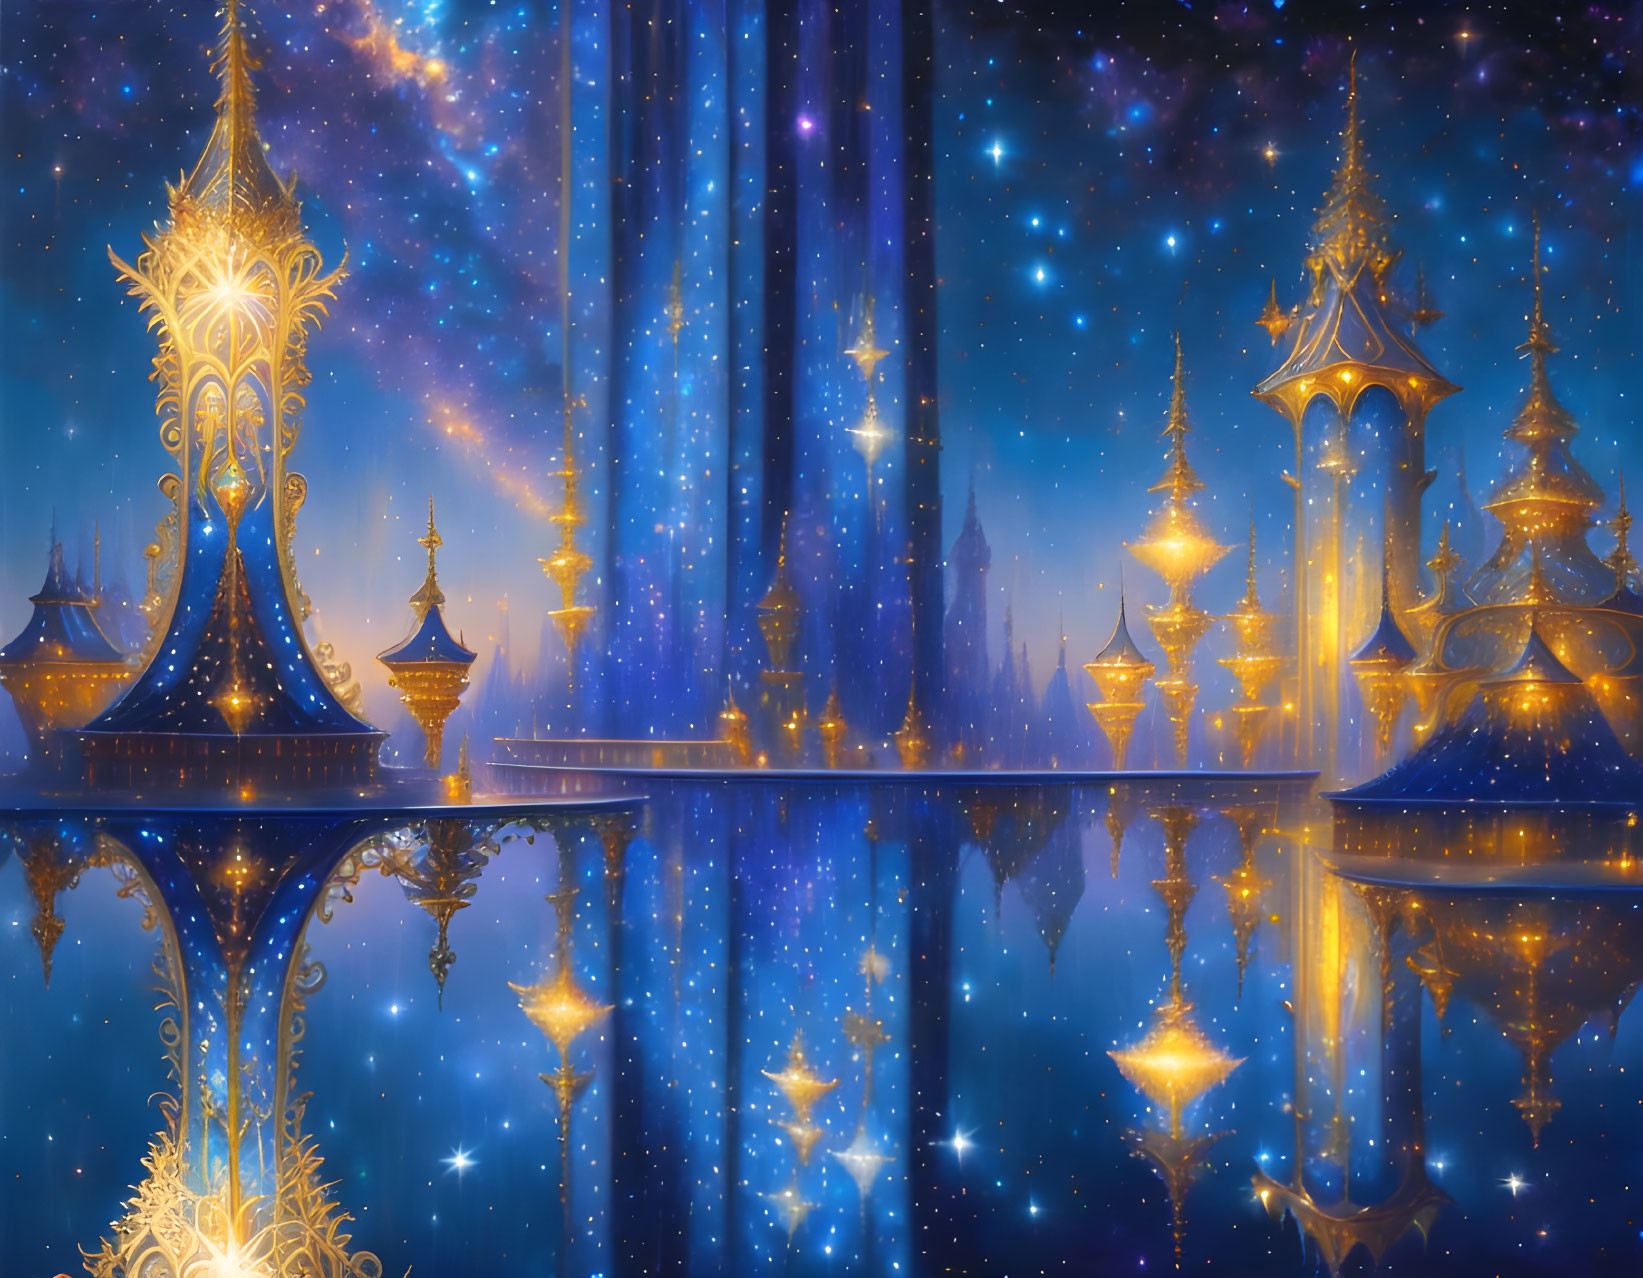 Night scene with illuminated ornate spires reflected on tranquil surface under starry sky with nebulae